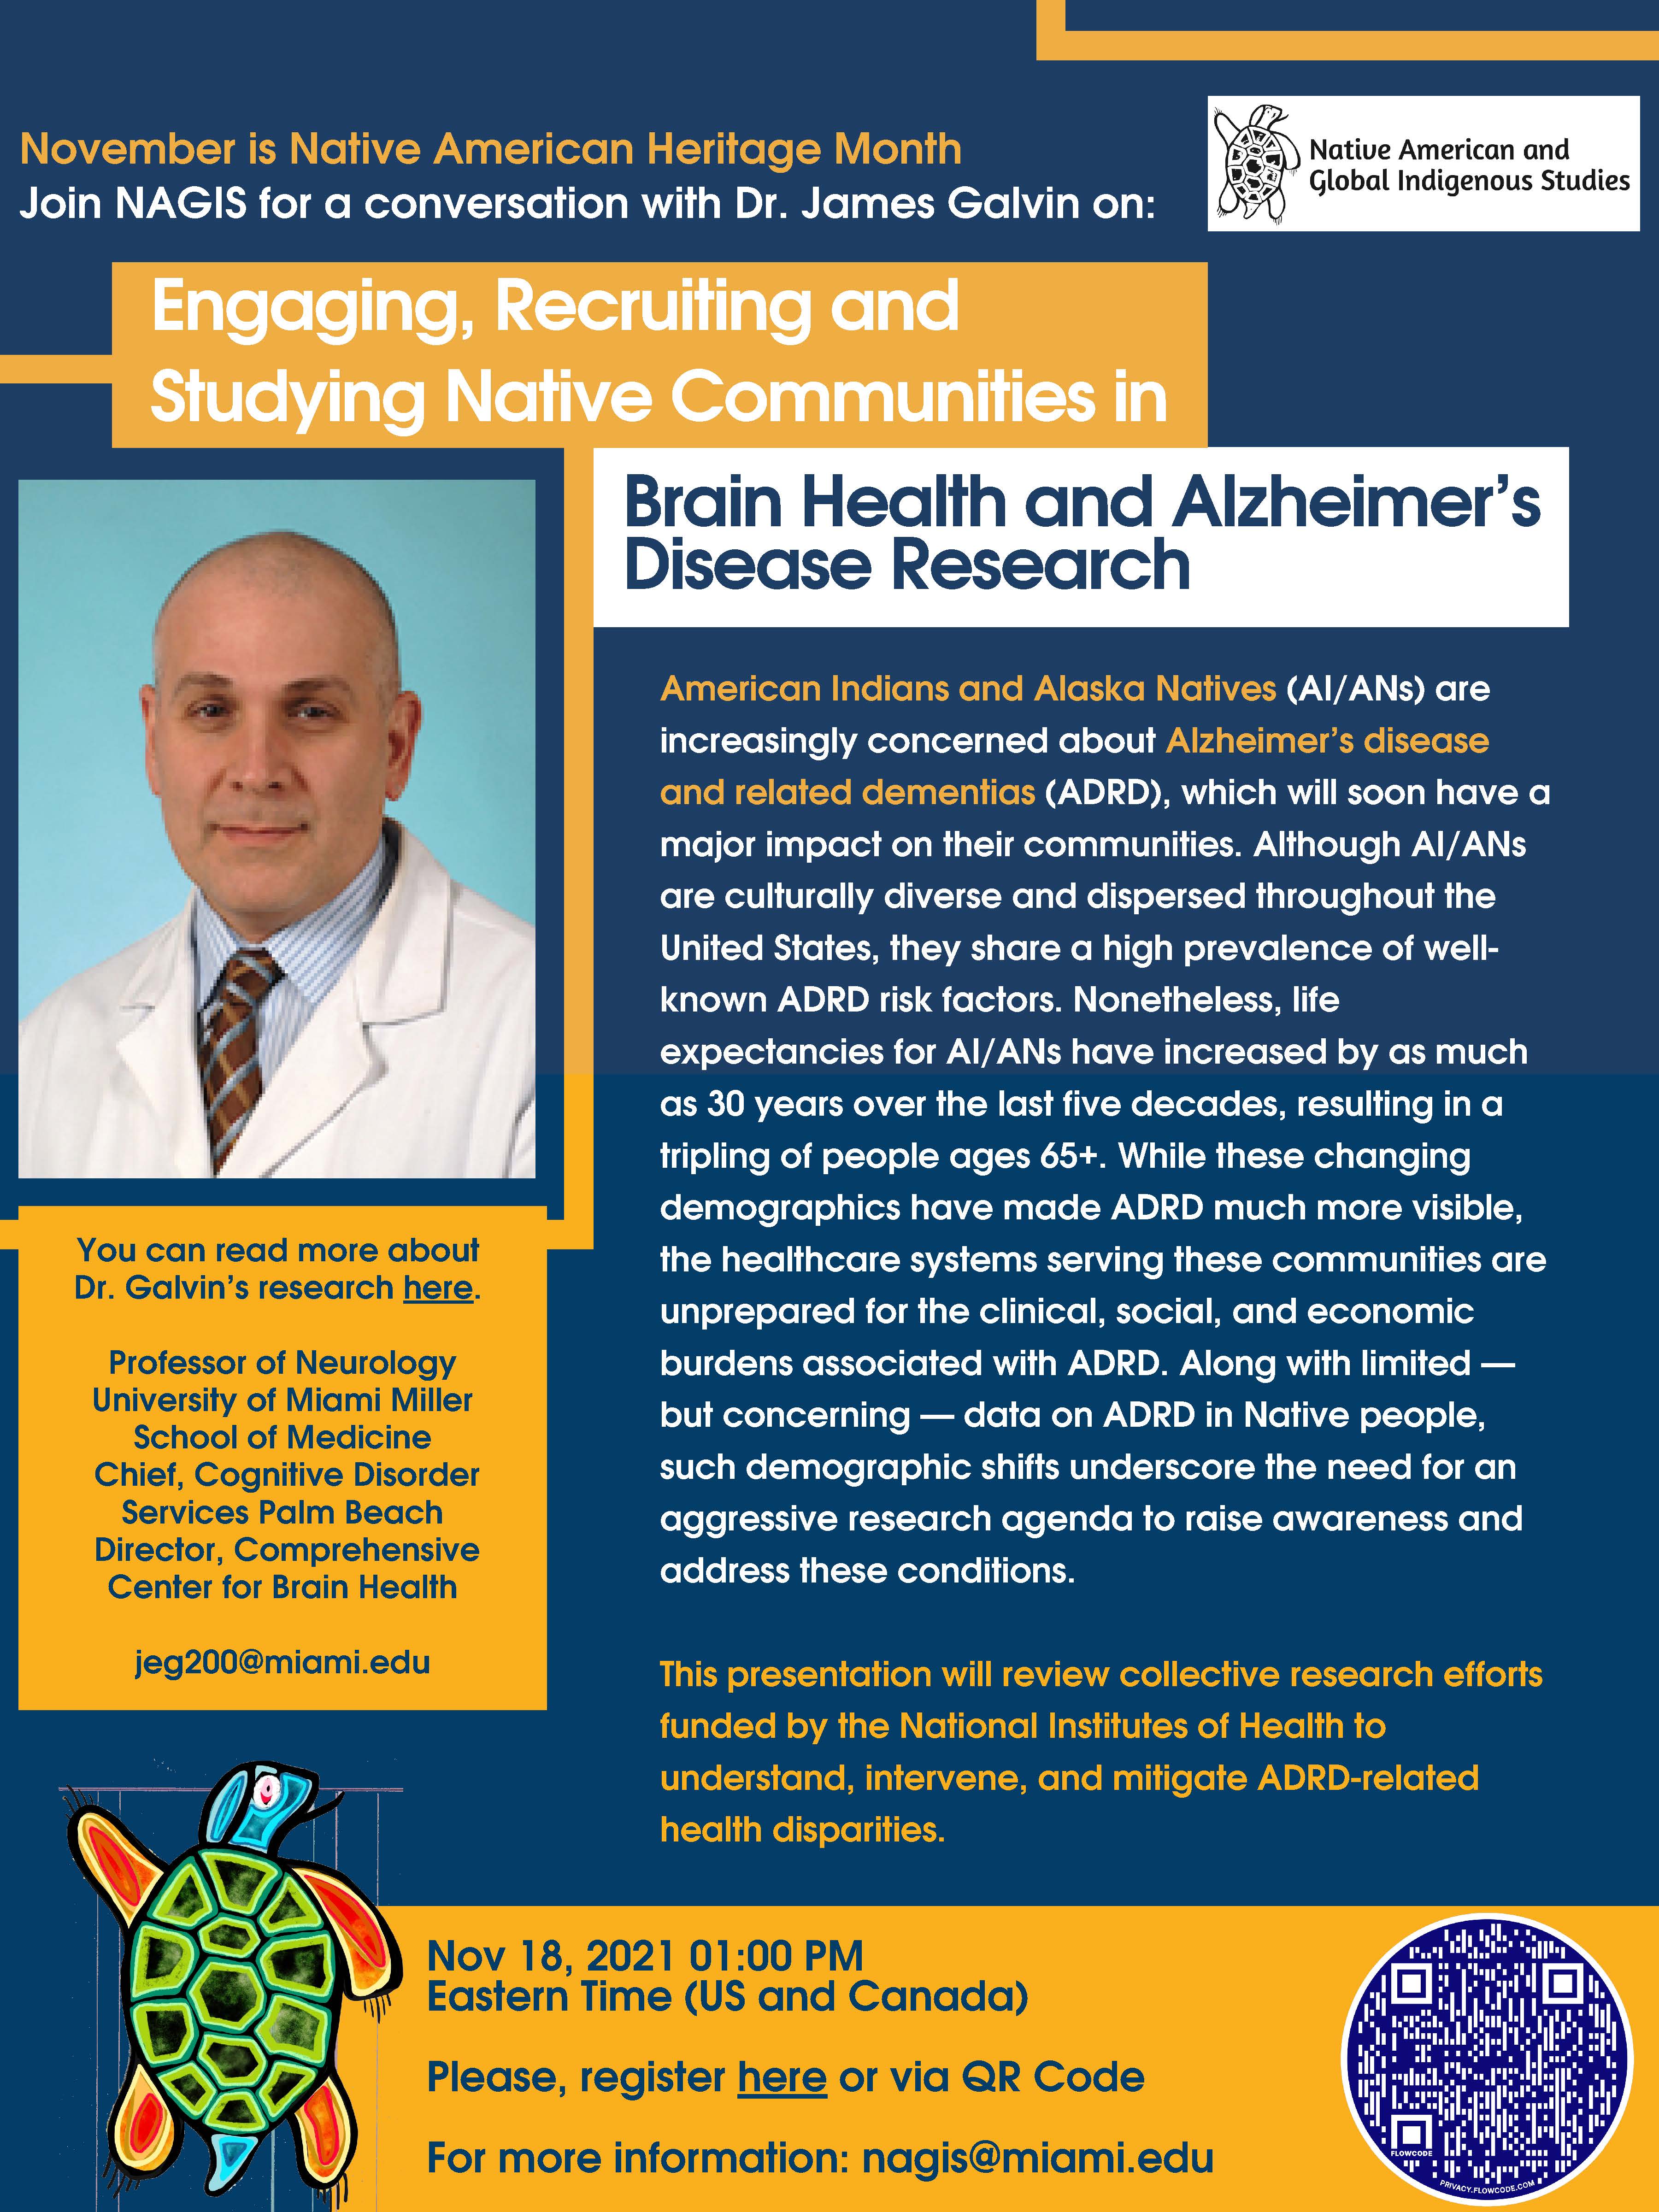 This is an image of an event flyer. The flyer has a navy blue and yellow background with white and yellow text. There is a picture of the guest speaker James Galvin. This event, titled "Engaging, Recruiting, and Studying Native Communities in Brain Health and Alzheimer's Disease Research," will be held on November 18, 2021 at 1:00 p.m. EST via Zoom. There is a QR code on the bottom left-hand corner of the flyer which when scanned will take the user to the Zoom registration web page.